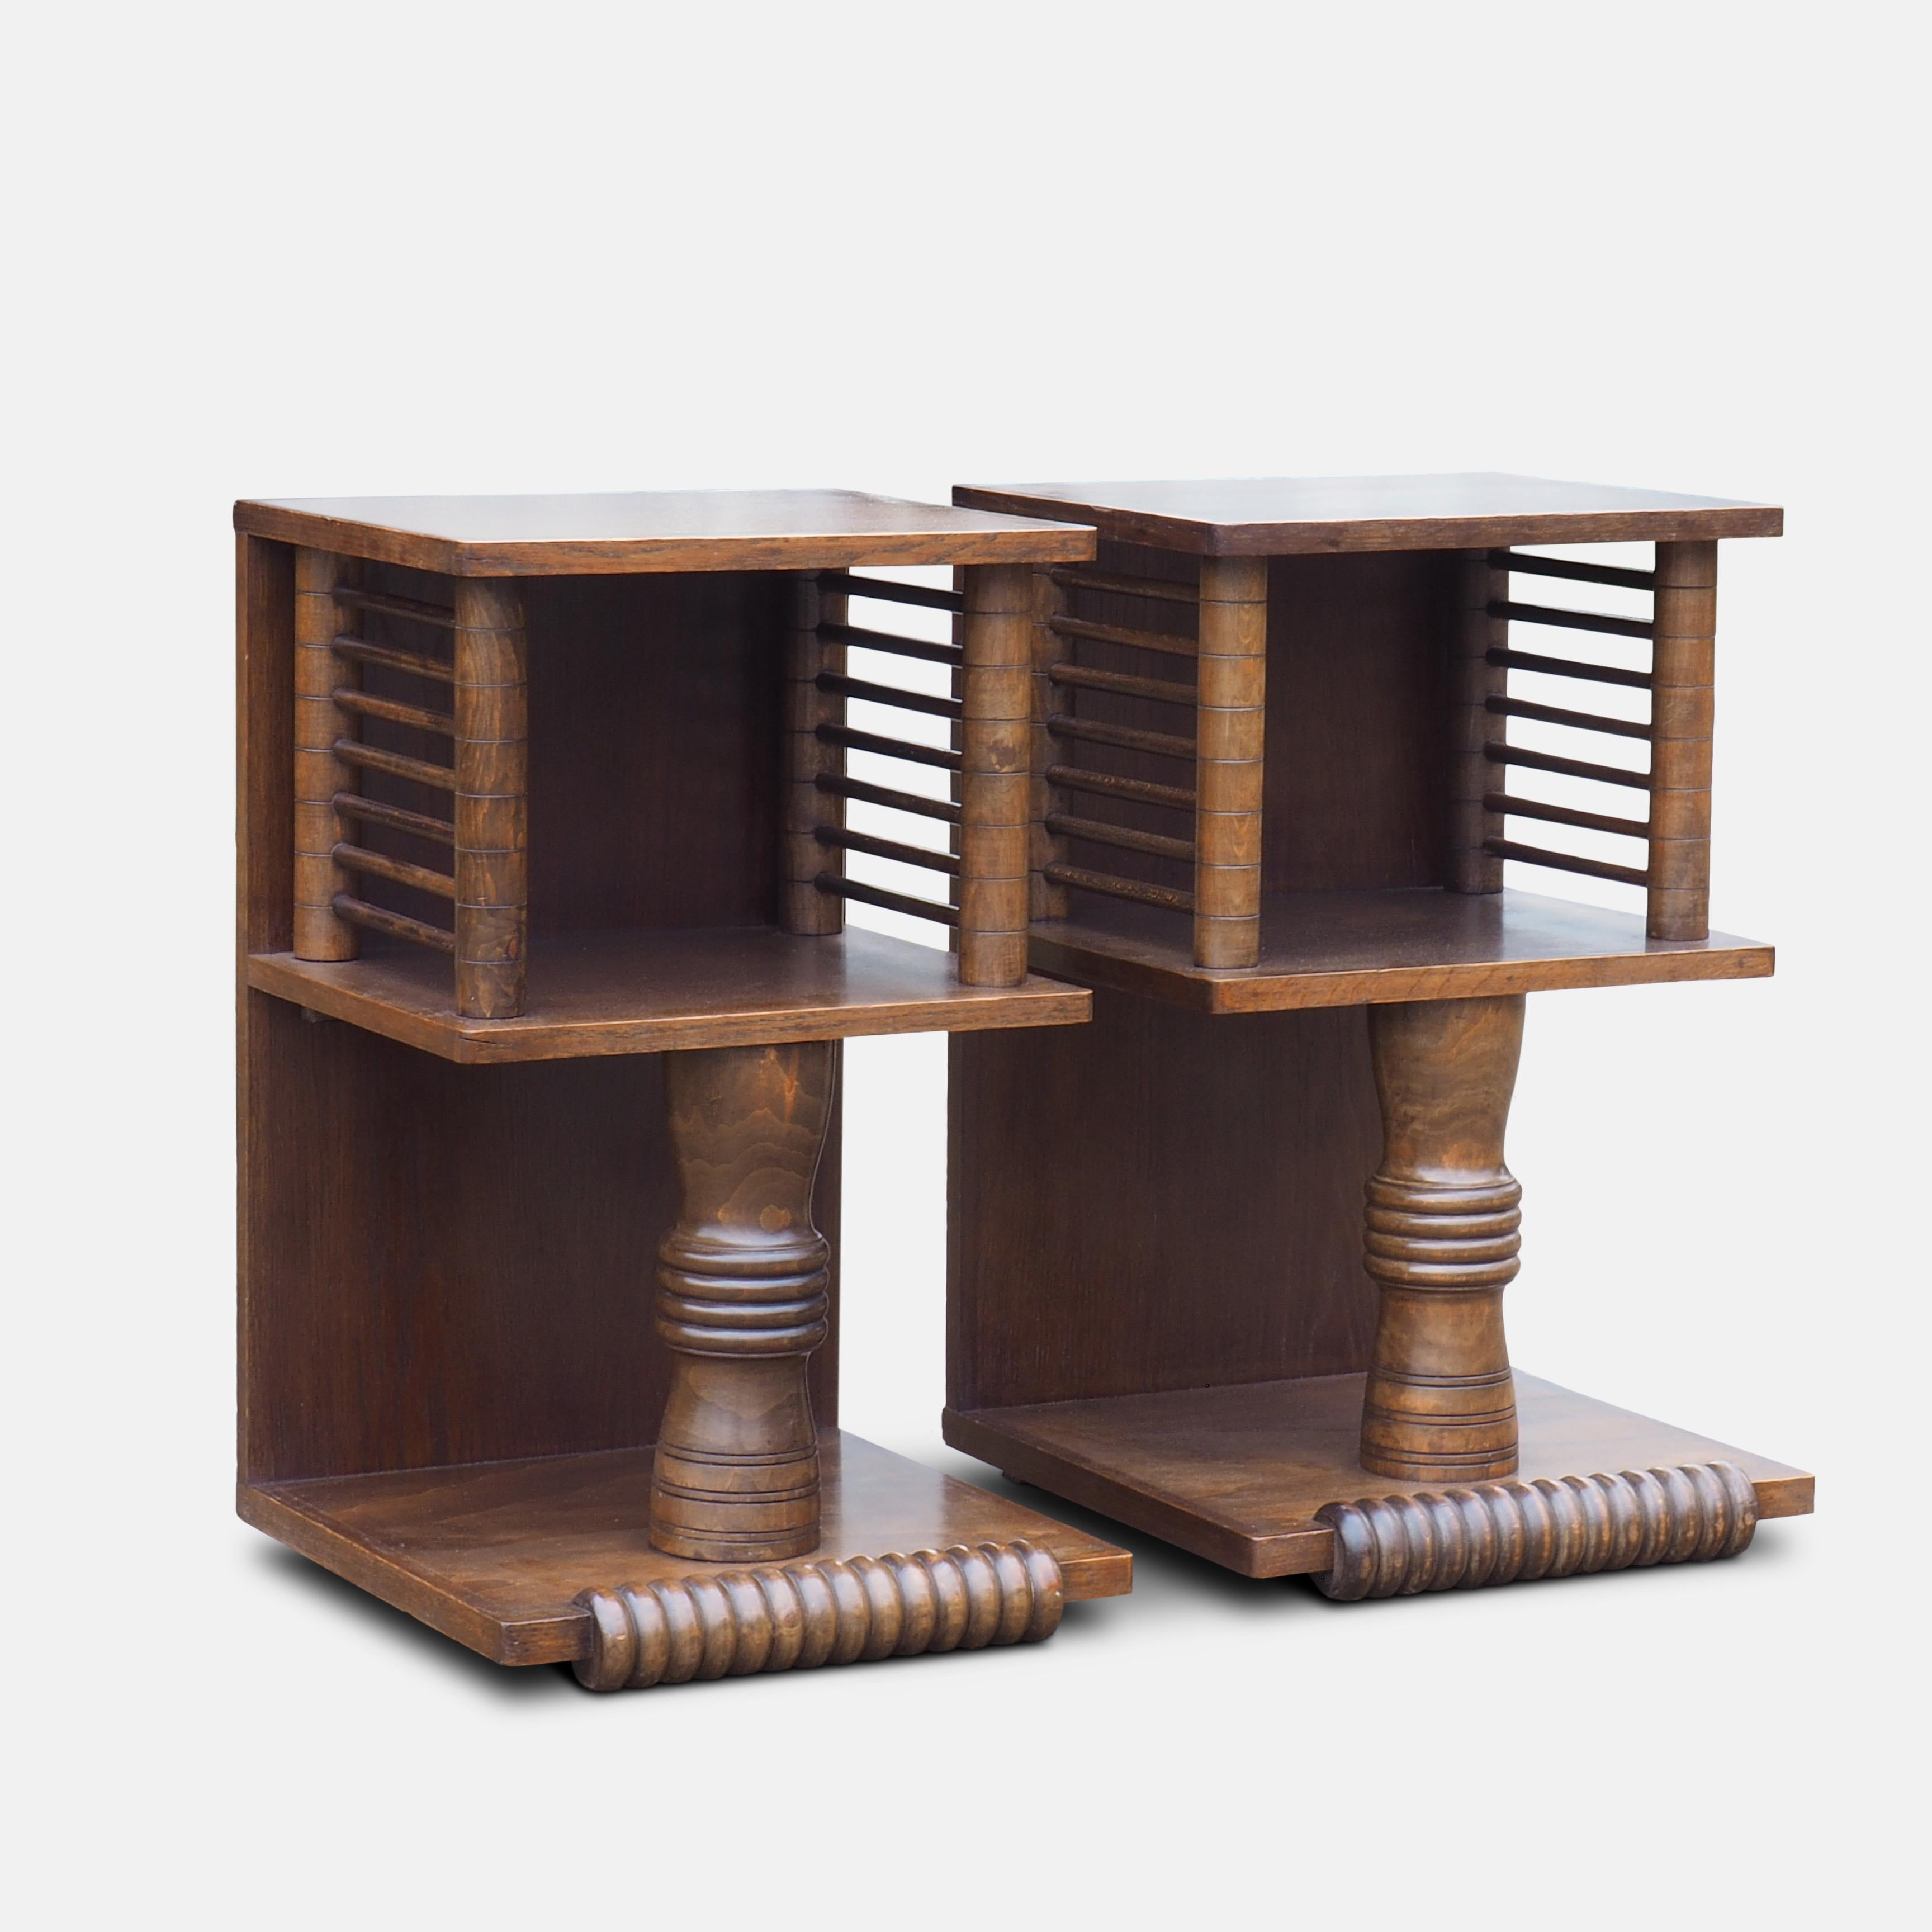 Pair of Charles Dudouyt (1885-1946) French tables, circa 1930.
Strongly influenced by African art, these richly carved tables mark a move form Art Deco to the bold abstract forms of Picasso and the modern movement.

An important figure in early